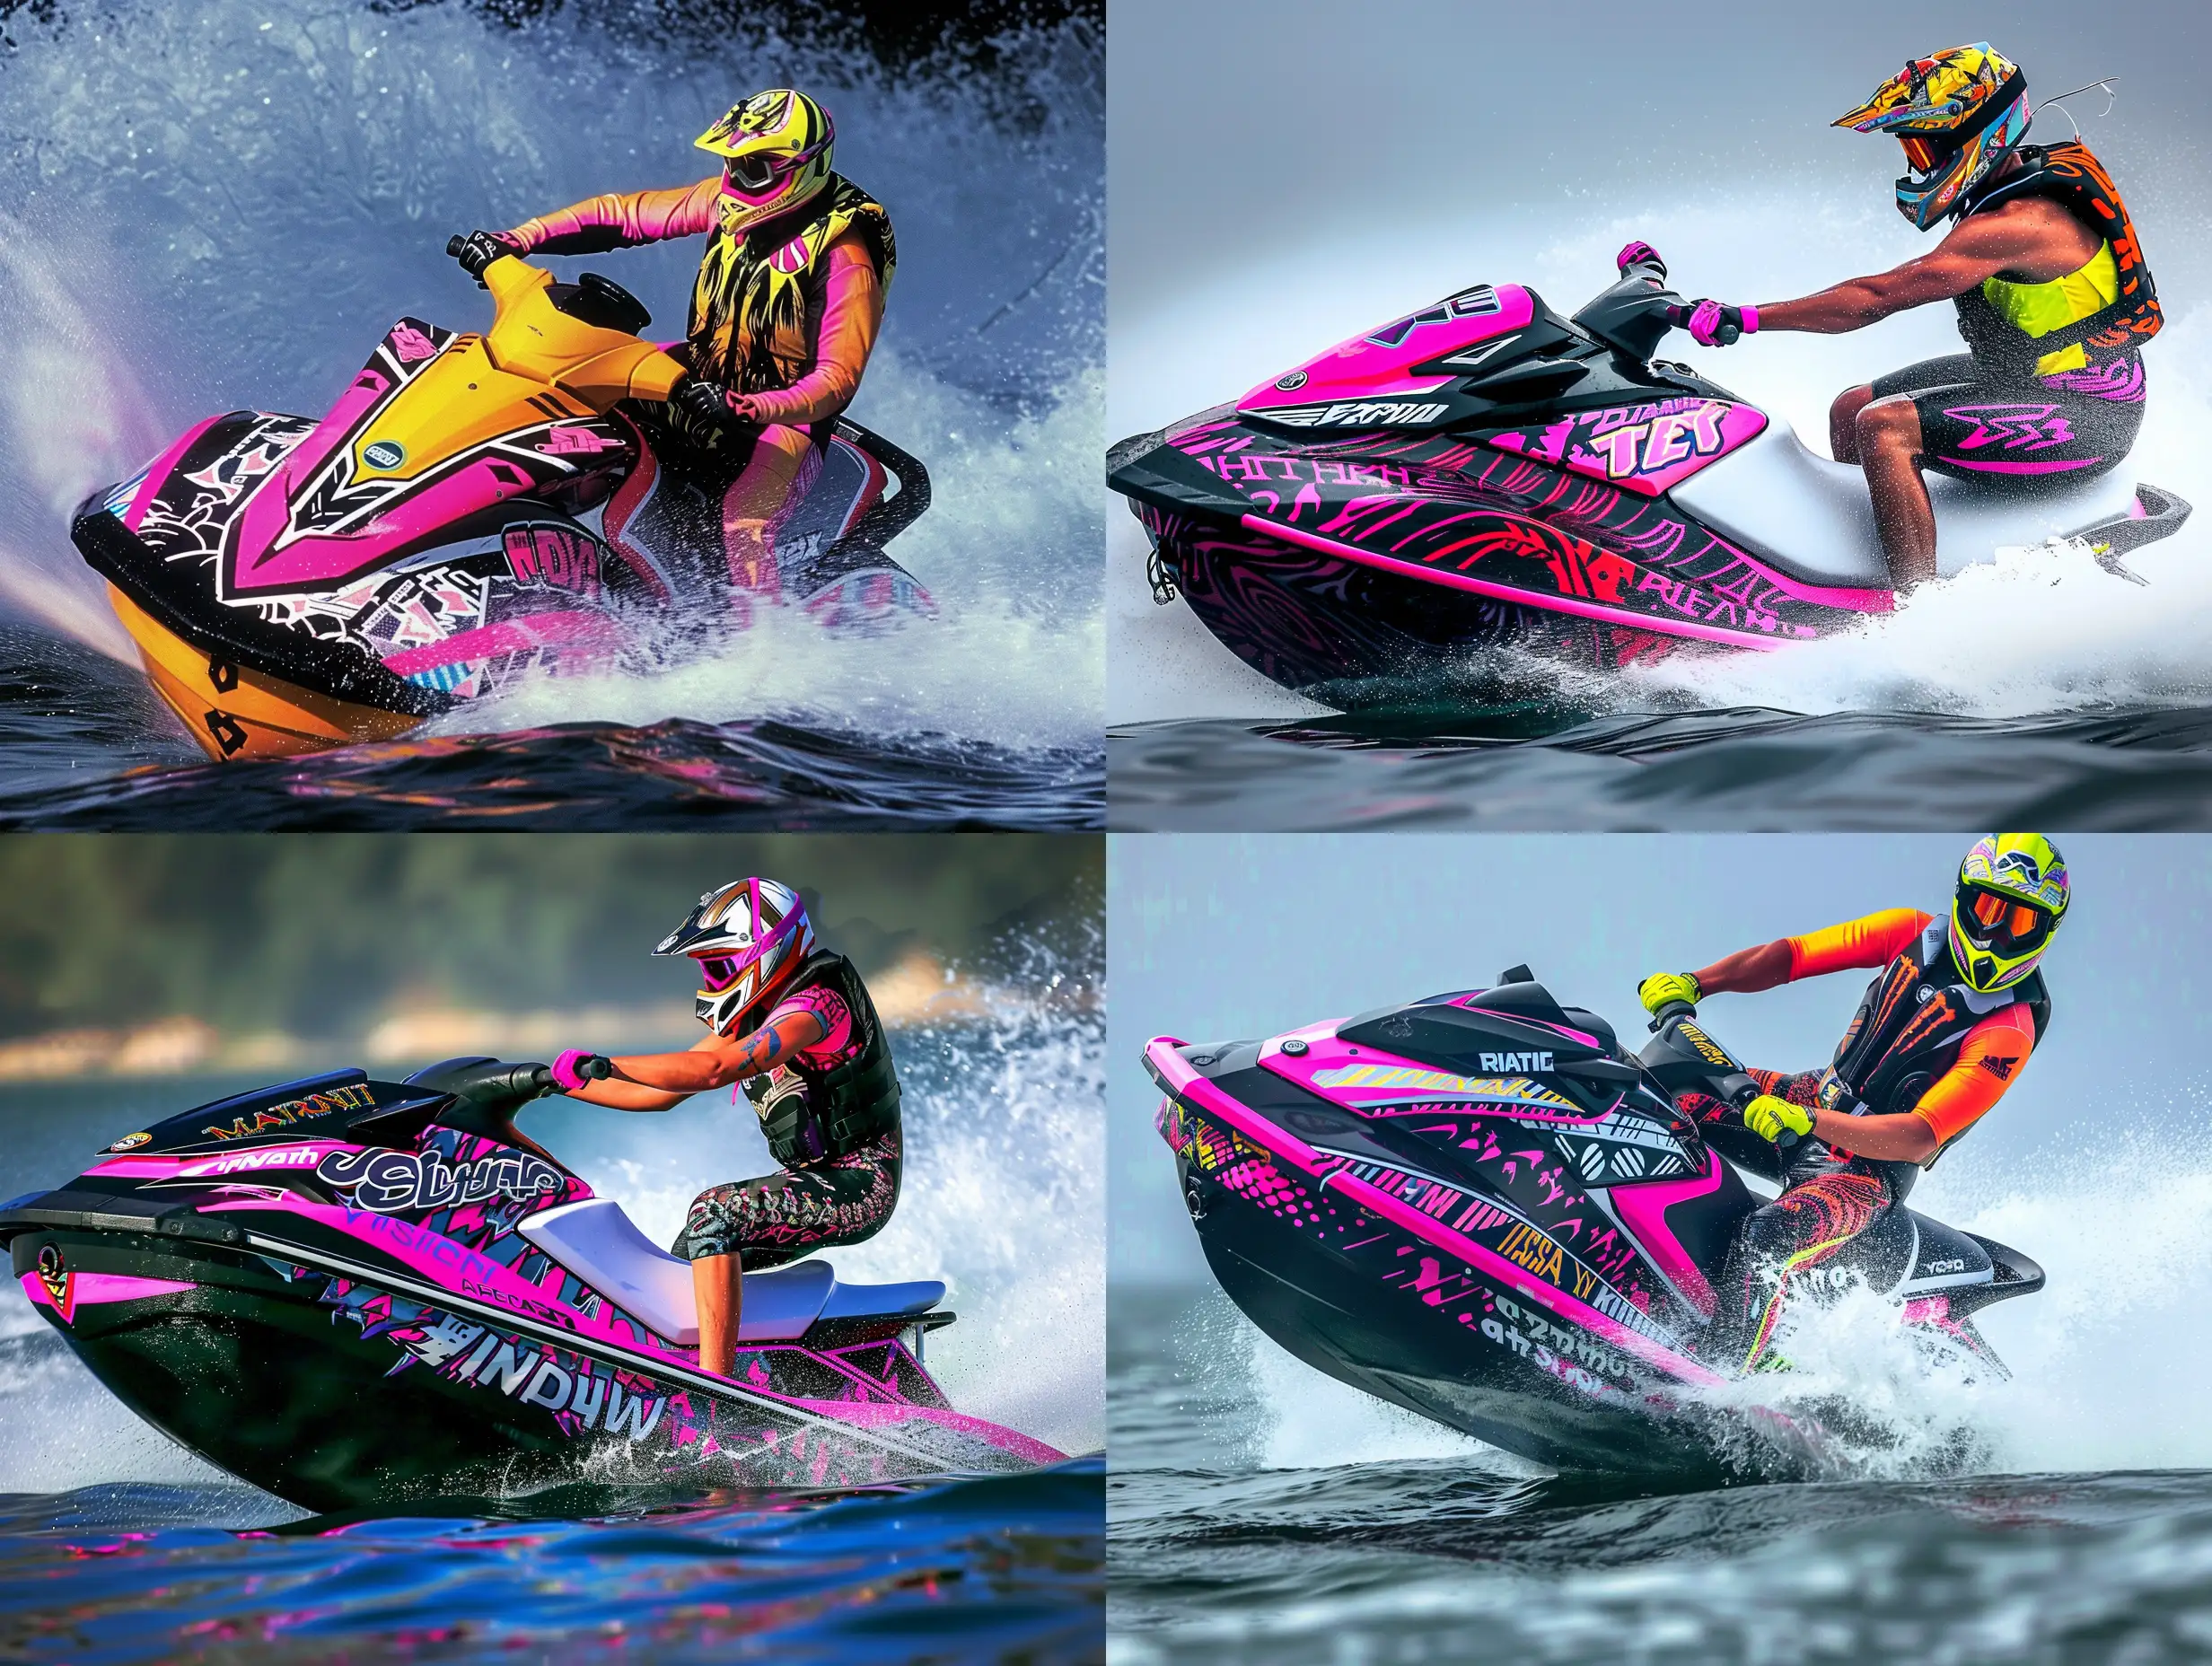 90s jetski race action photography, rider and jetski in bright neon colors, the jetski has decals with bright pink and black graphics